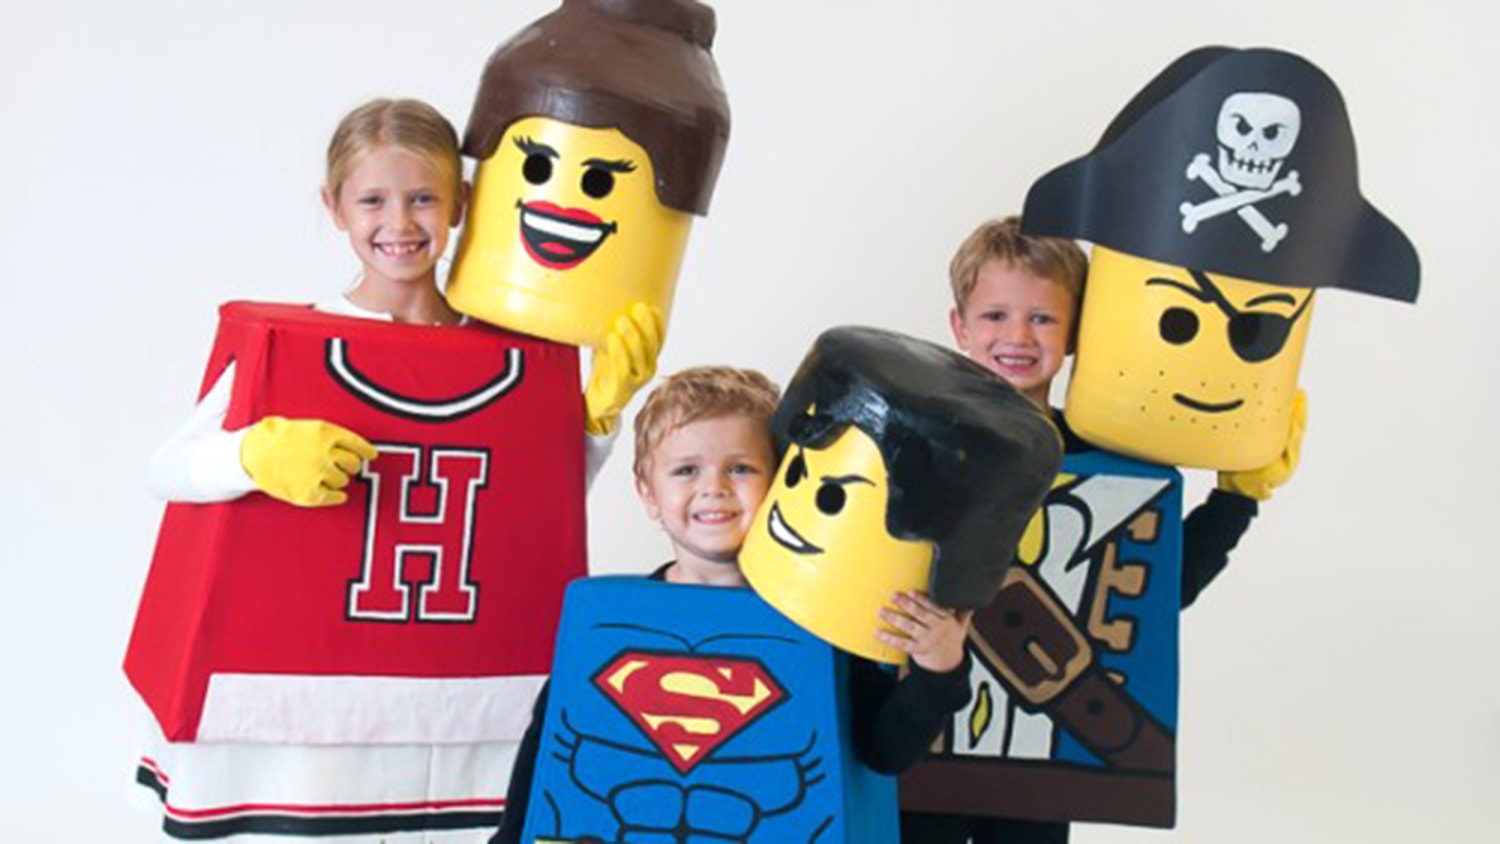 31 days of Halloween costumes: Lego family